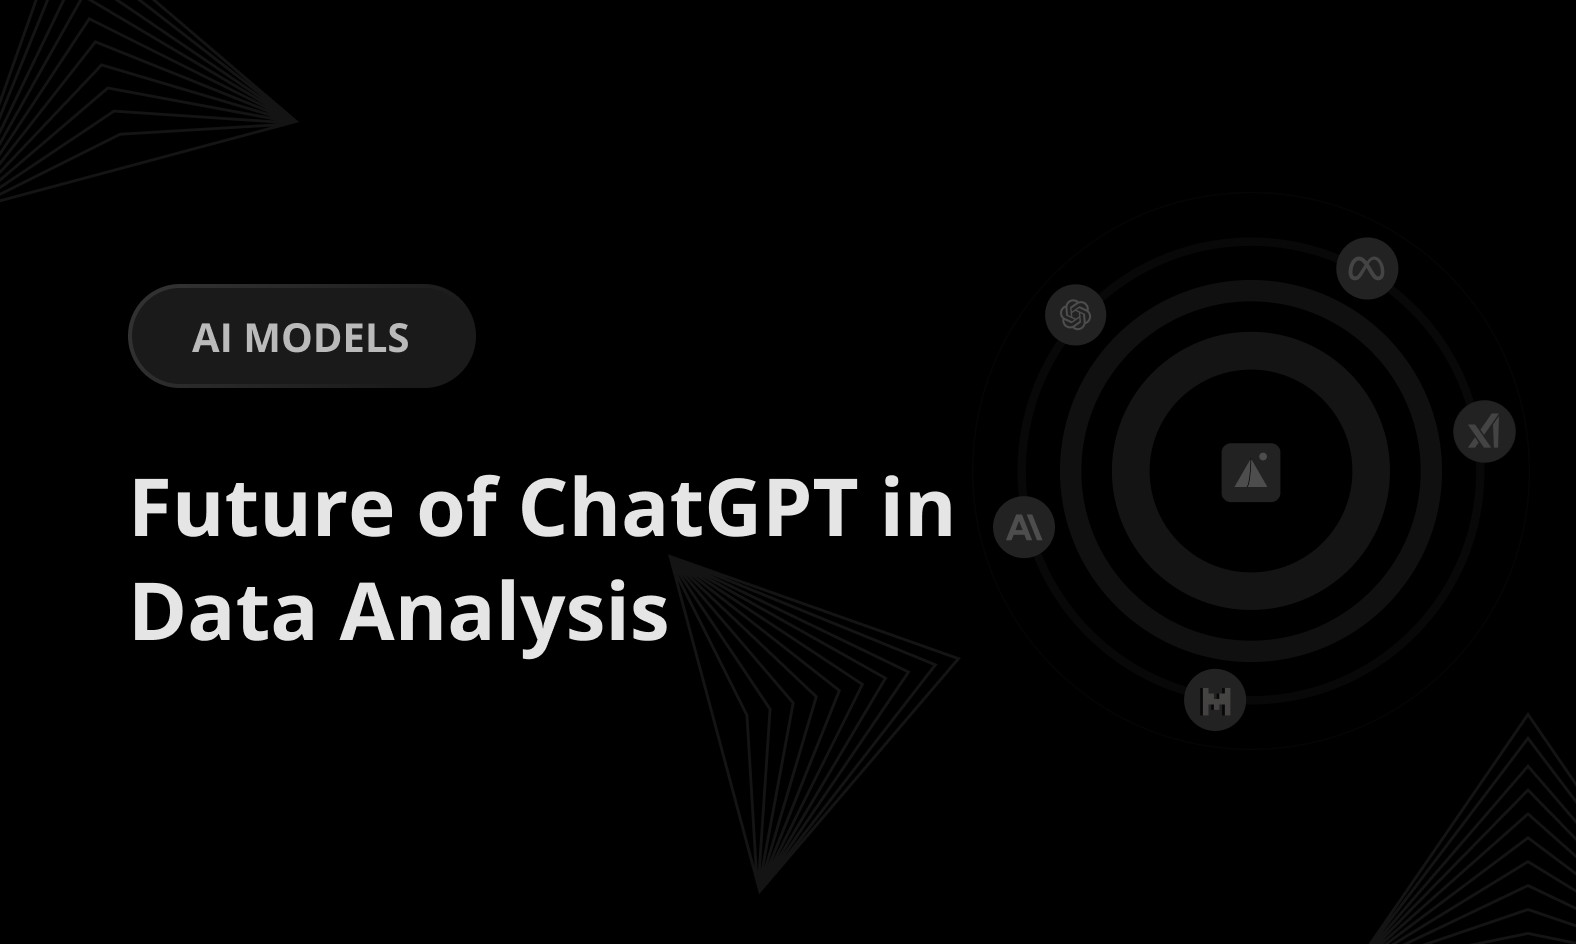 Future of ChatGPT in Data Analysis